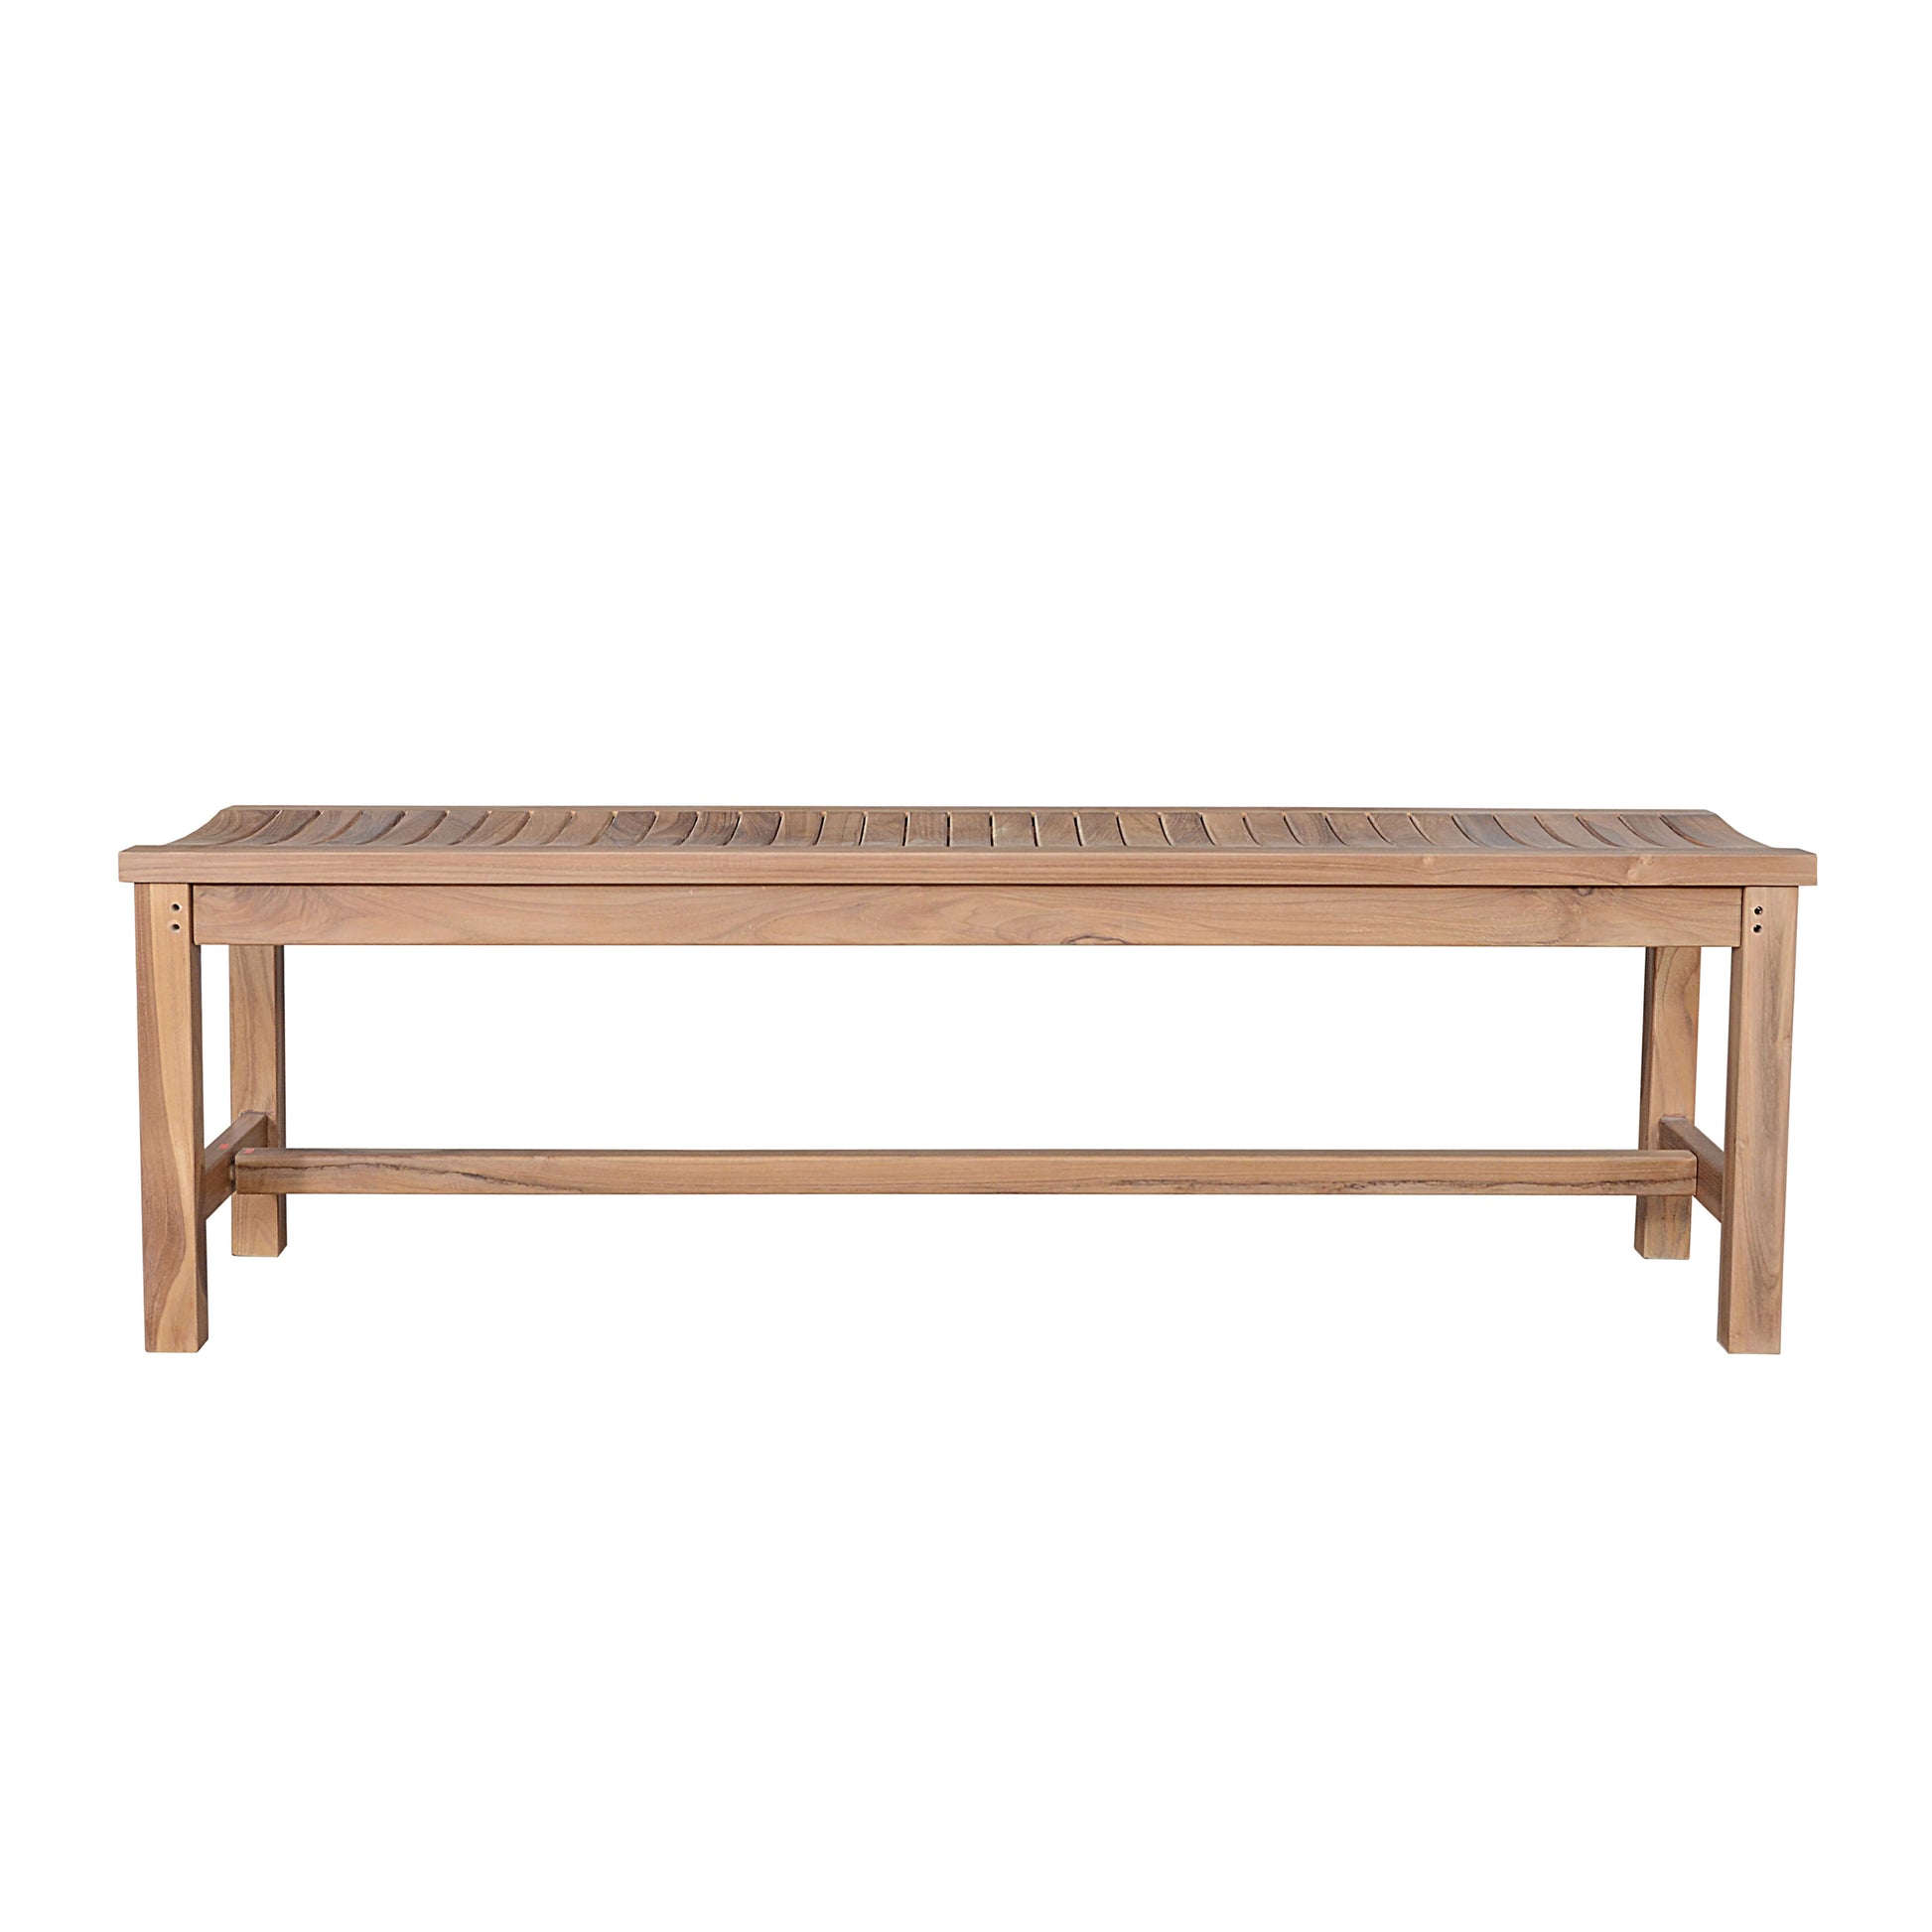 Madison 59" Backless Bench Bench Anderson   